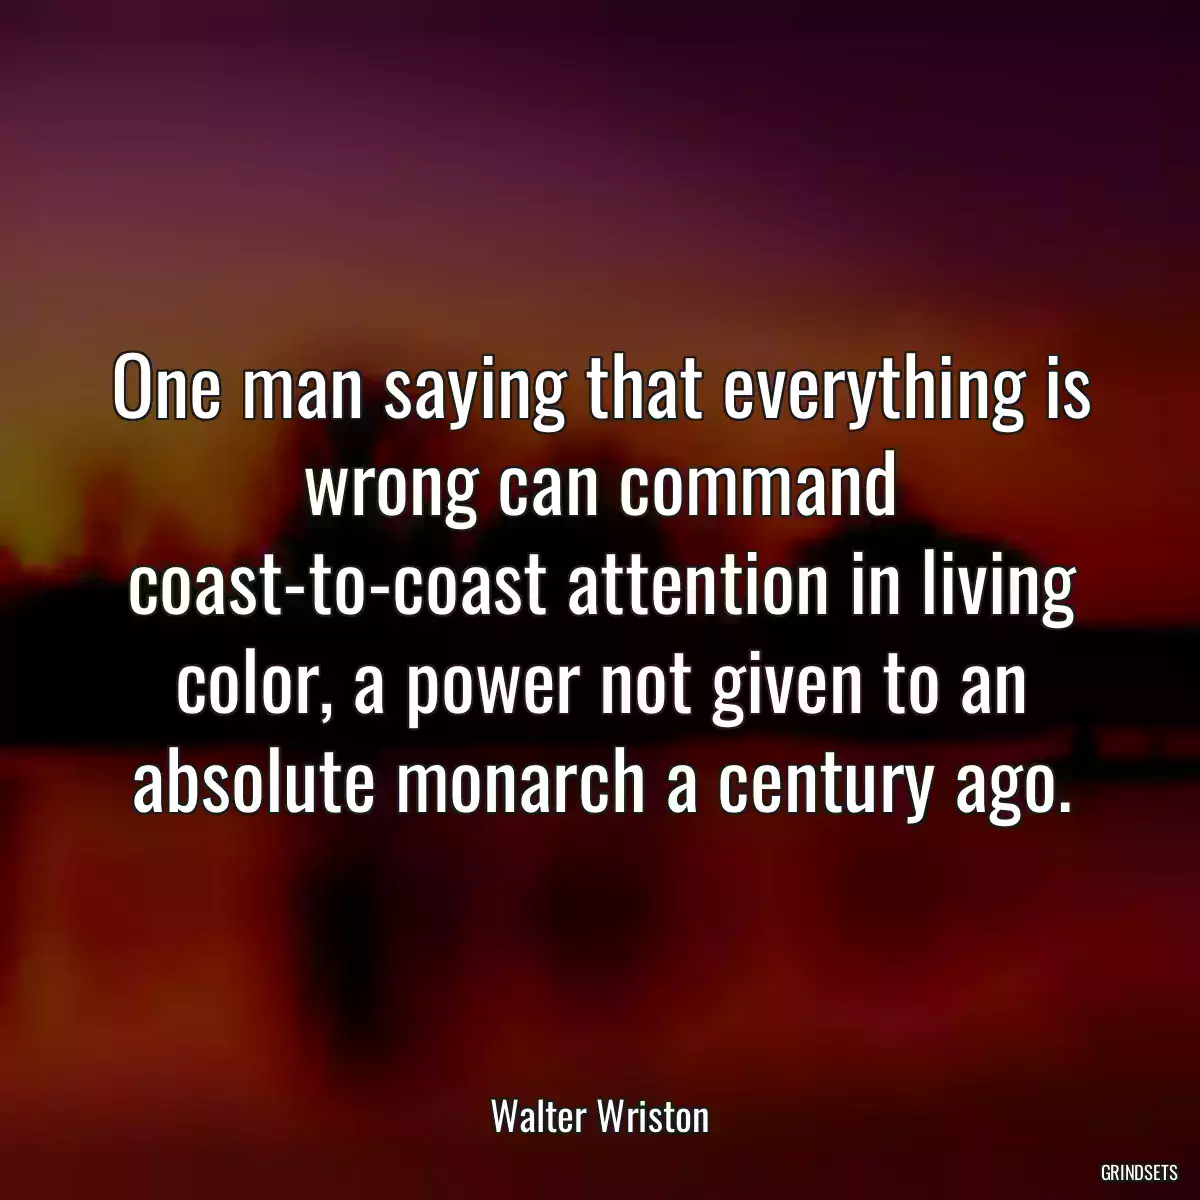 One man saying that everything is wrong can command coast-to-coast attention in living color, a power not given to an absolute monarch a century ago.